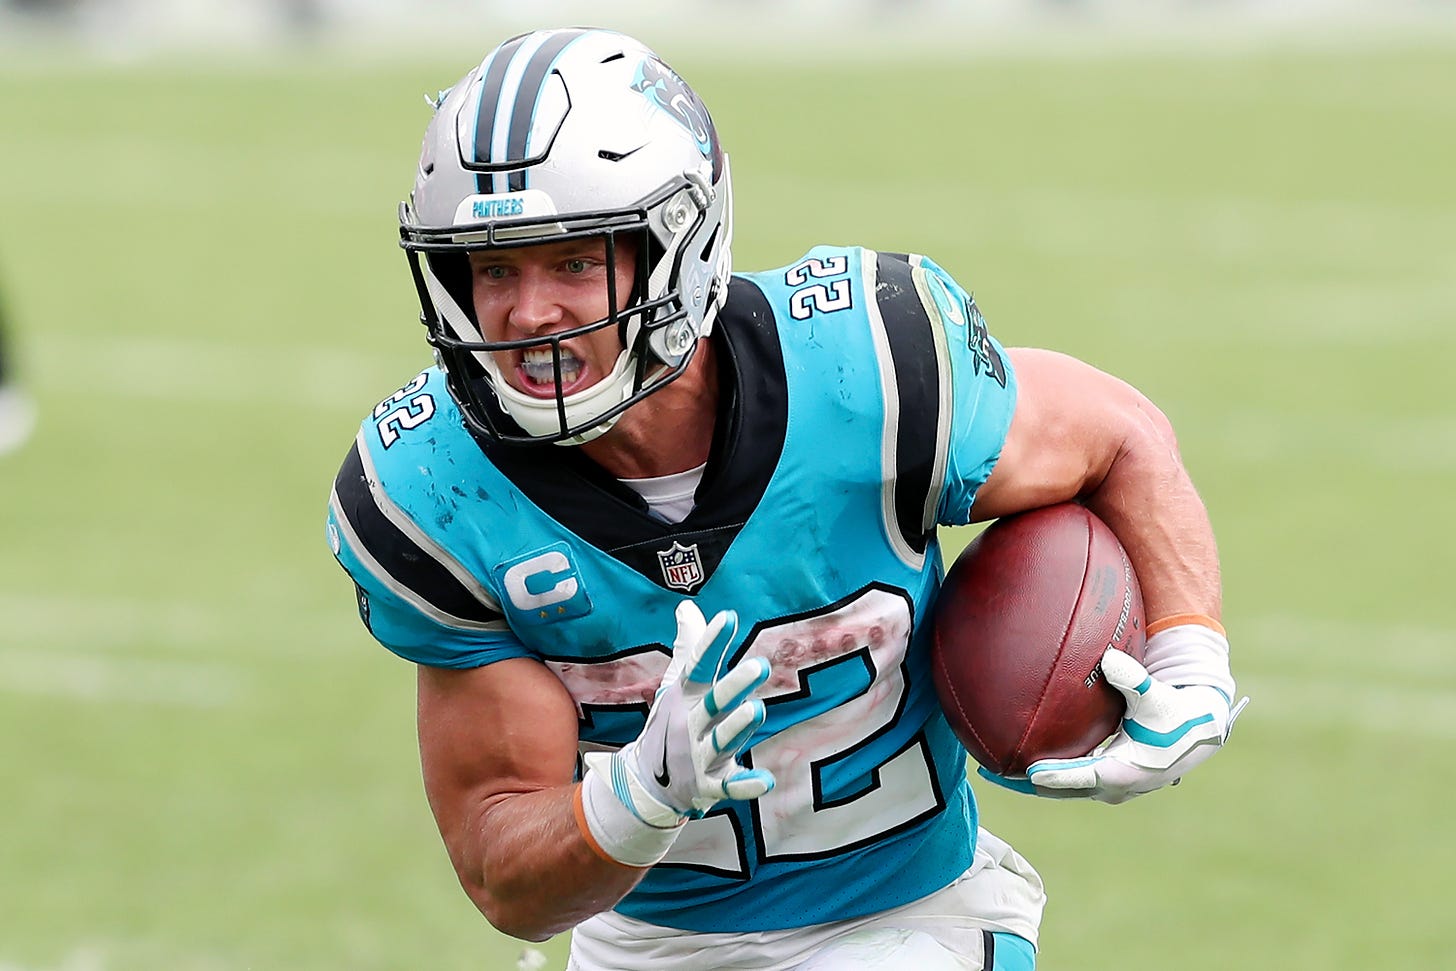 Injuries aside, Christian McCaffrey continues to fulfill expectations of  NFL superstardom